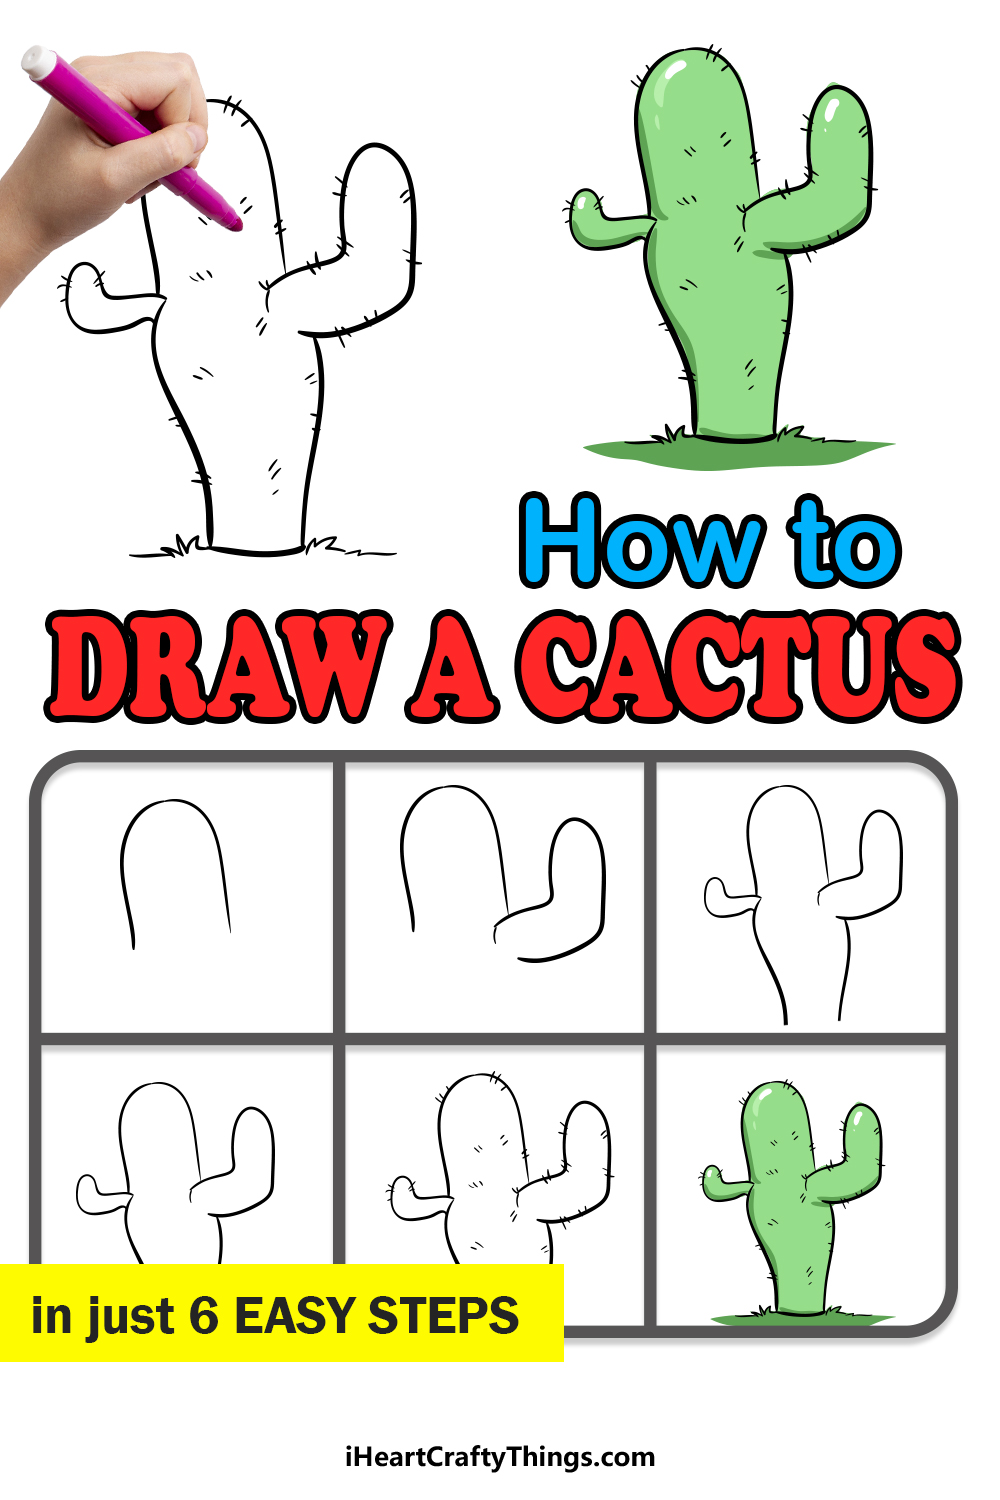 how to draw a cactus in 6 easy steps